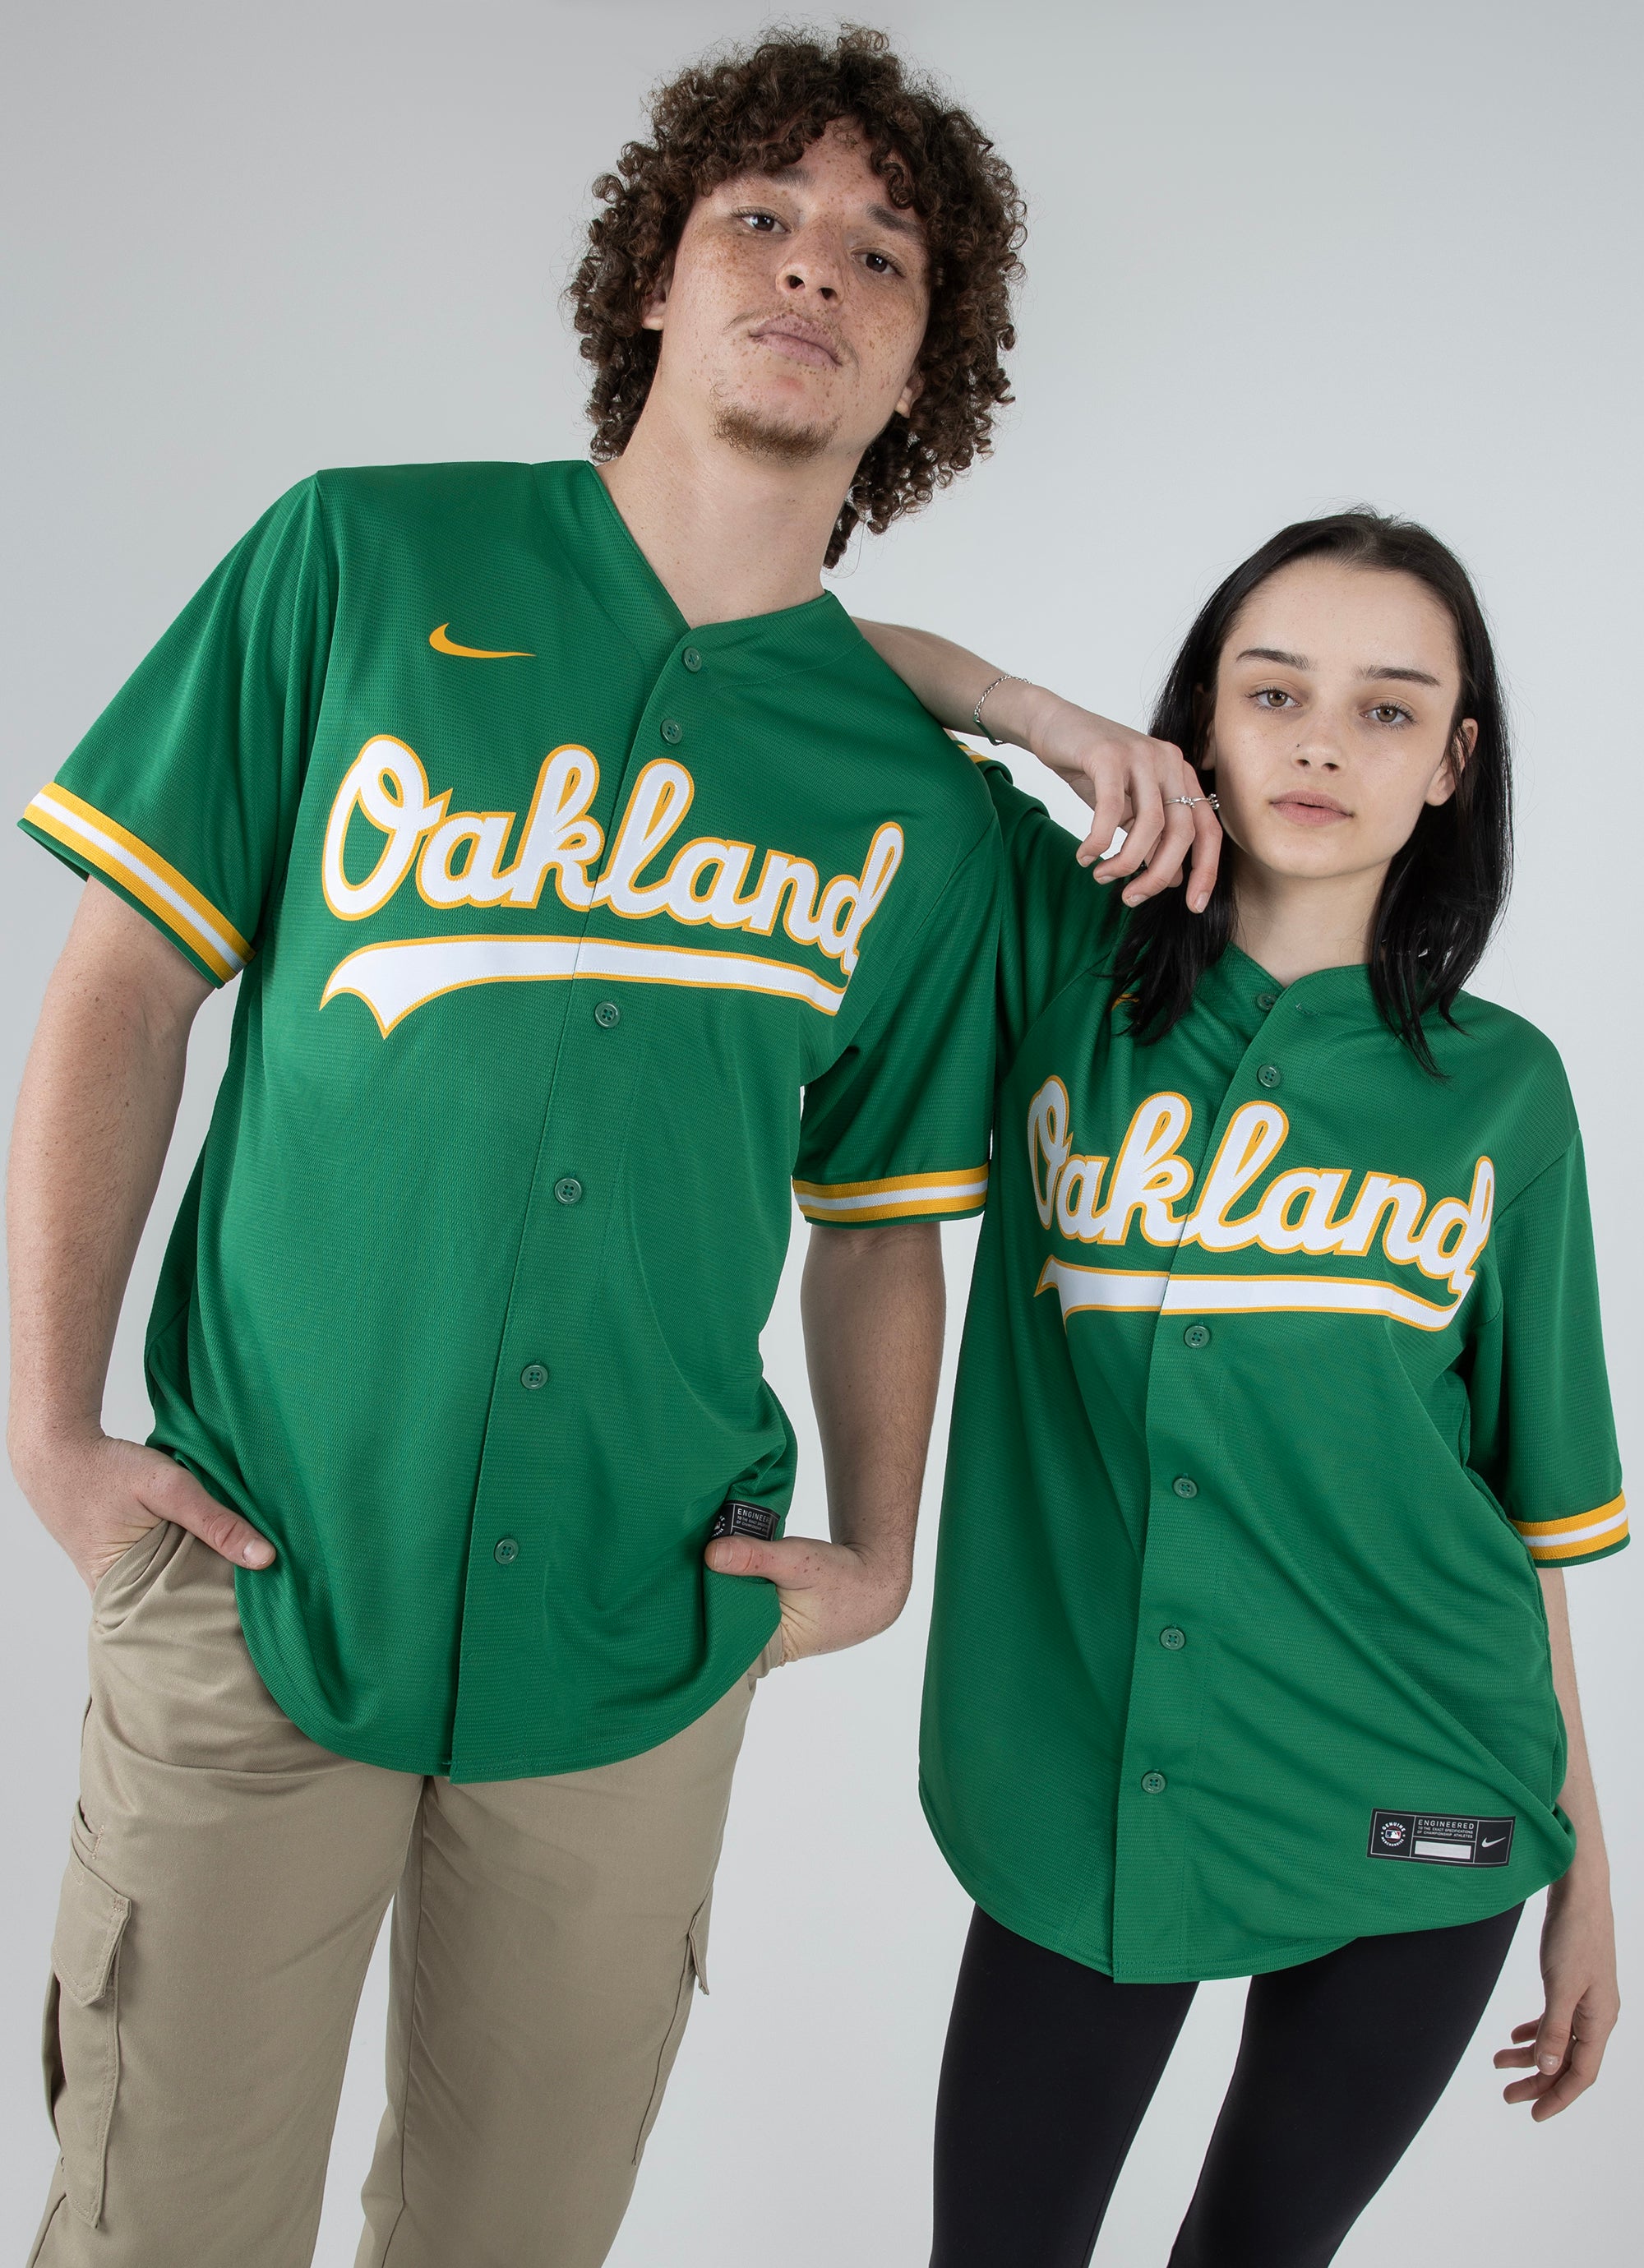 Nike Official Mlb Replica Alternate Oakland Athletics Jersey in Green